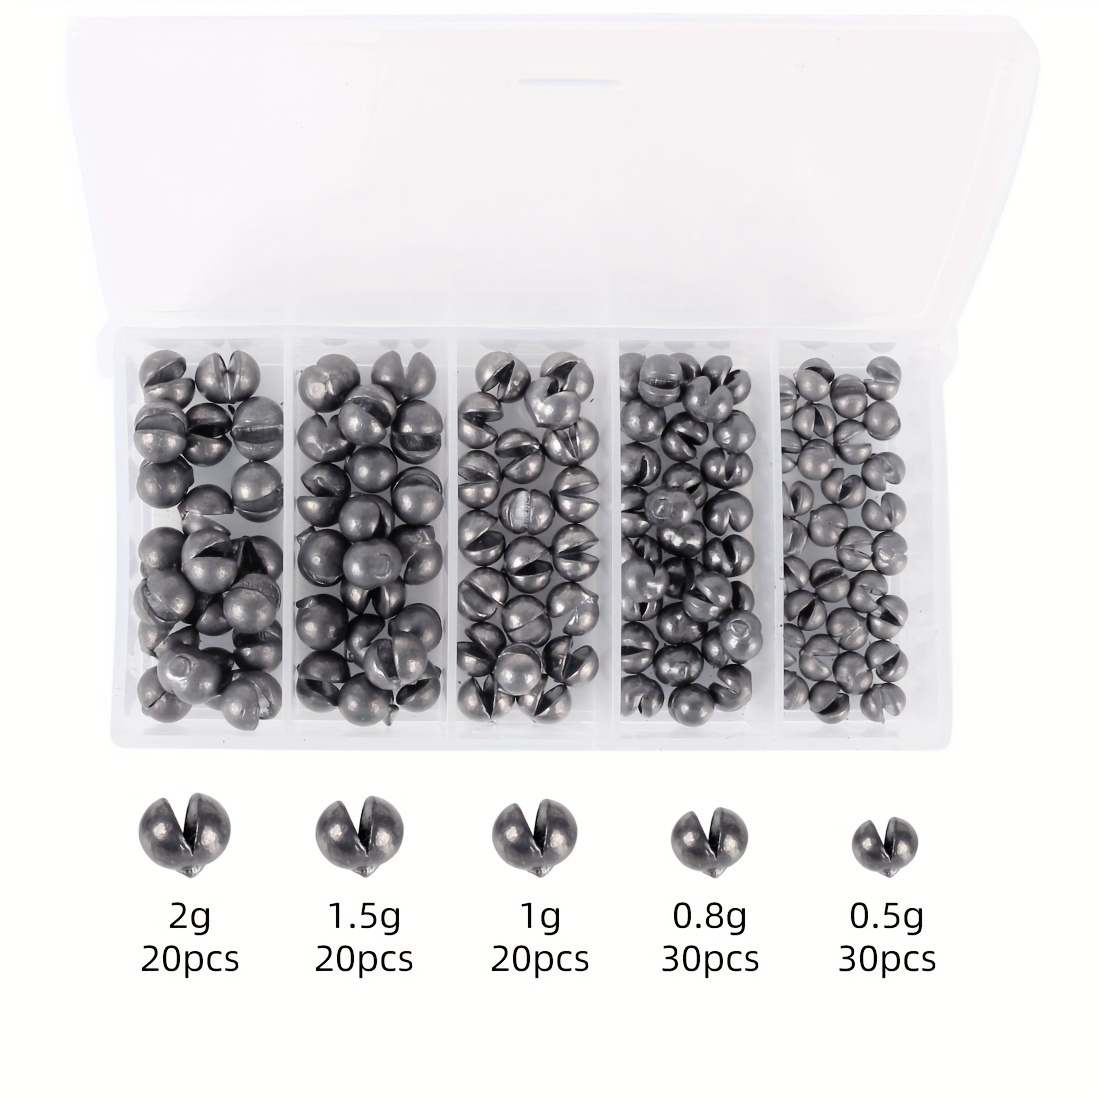 

120pcs Split Shot Fishing Sinkers Kit - Get More Fish With These Tackle & Accessories!